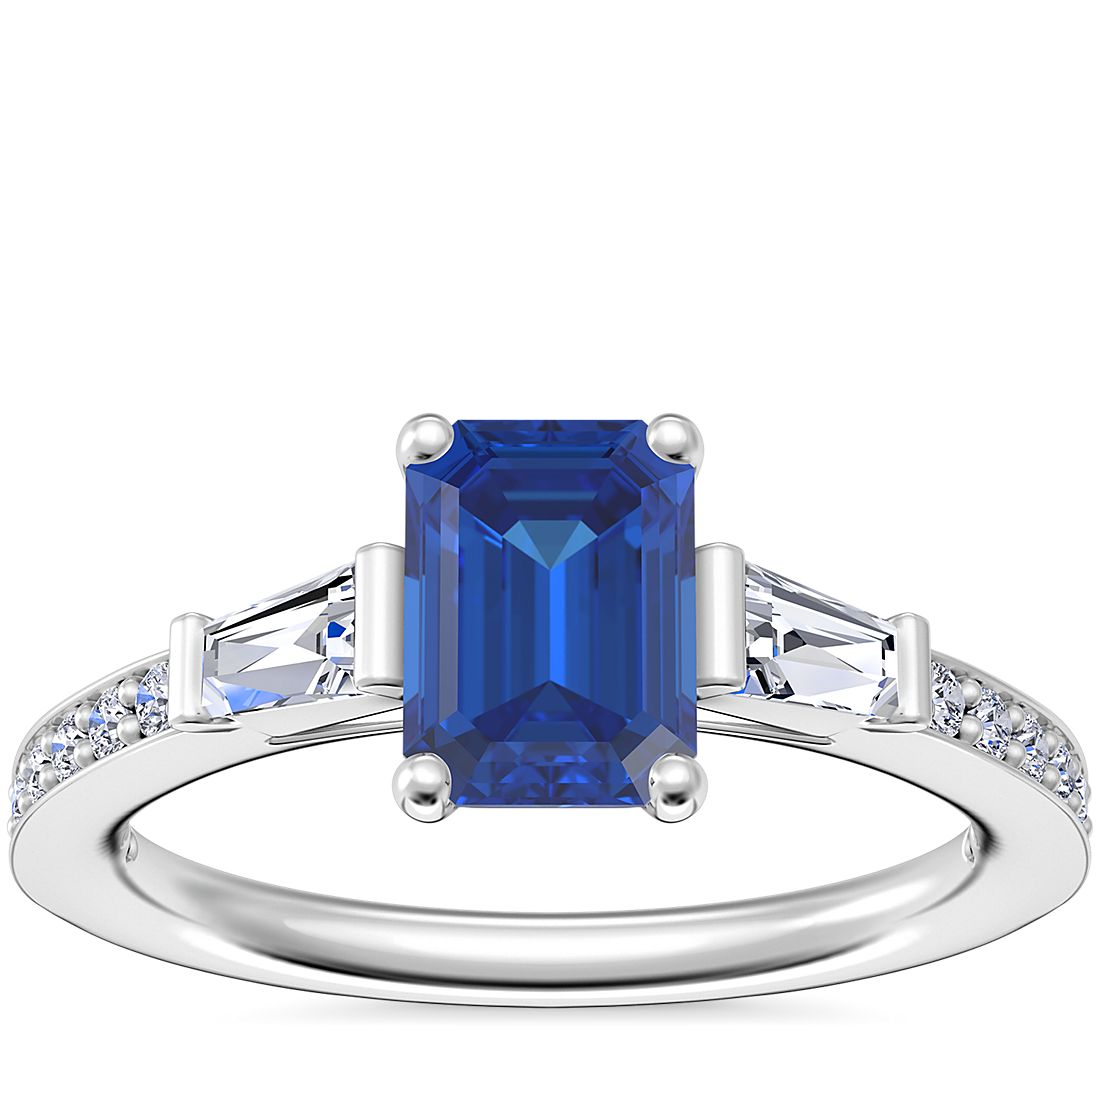 Tapered Baguette Diamond Cathedral Engagement Ring with Emerald-Cut Sapphire in Platinum (7x5mm)